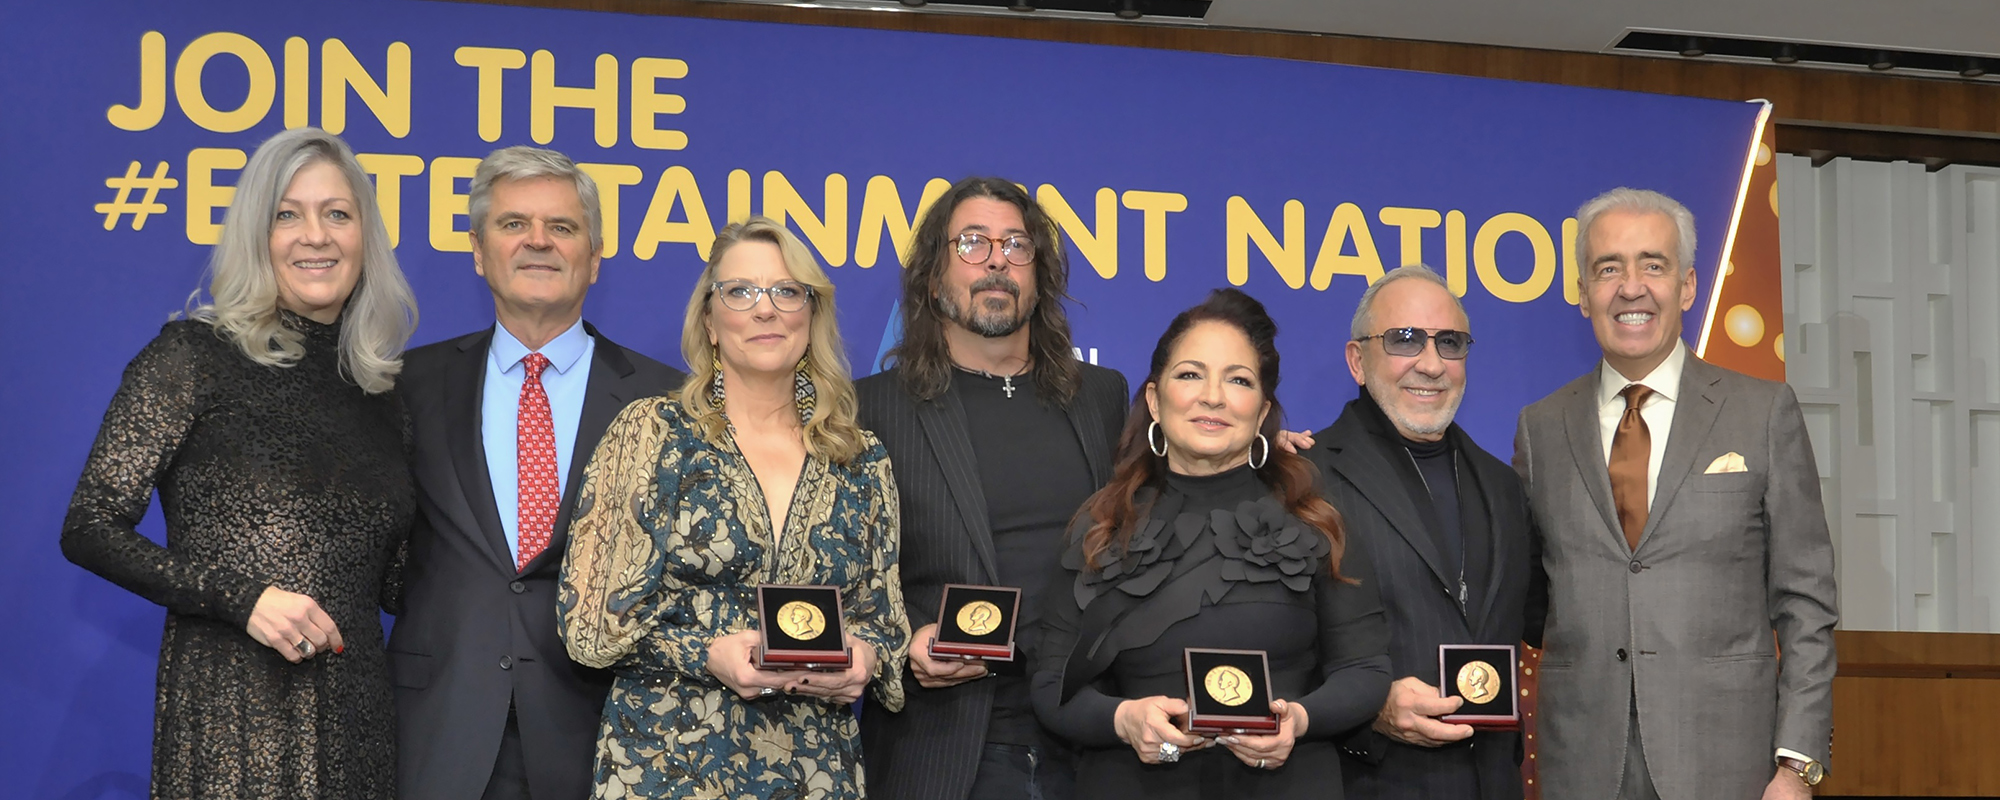 Dave Grohl, Gloria Estefan Bestowed with James Smithson Bicentennial Medals